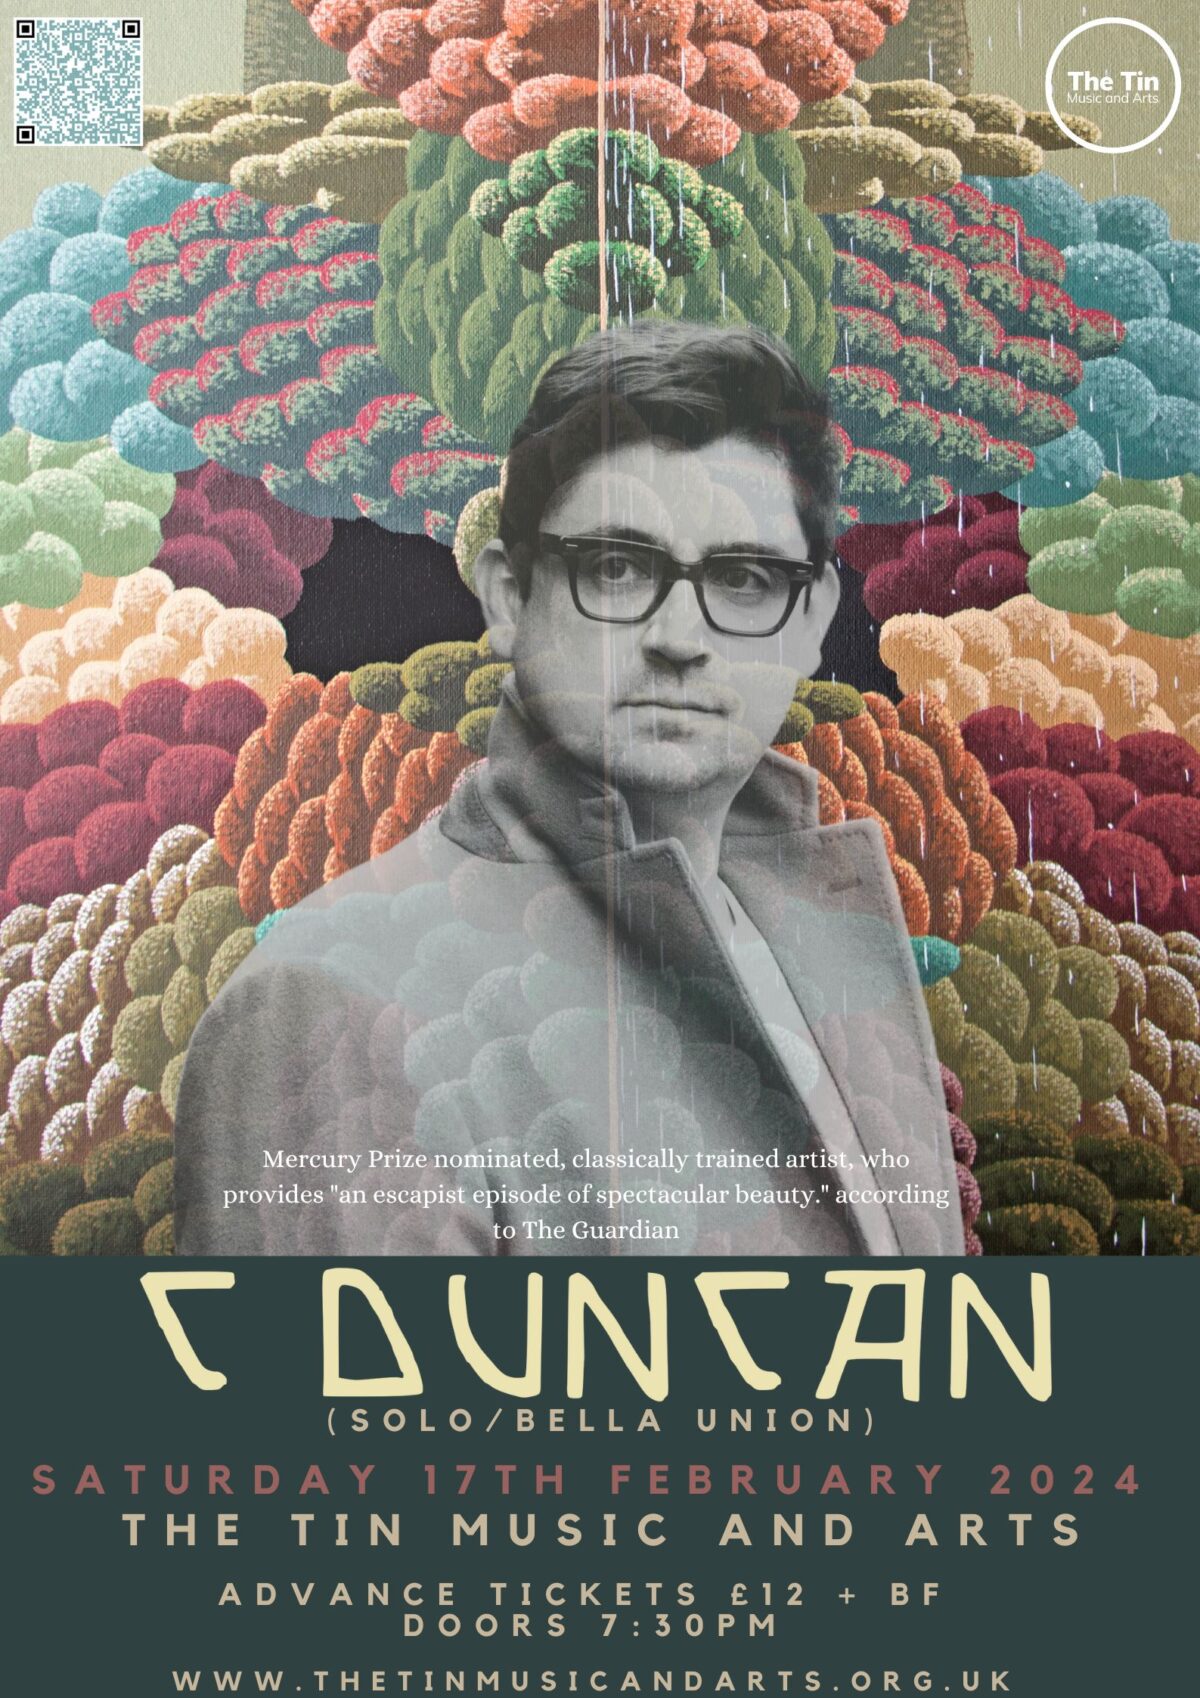 Poster for C Duncan's performance at The Tin Music and Arts on Saturday 17th February 2024. Top half of the poster features a black and white photo of C Duncan against a bright, multi-coloured background. The bottom third has text in yellow with details of tickets prices (£12 in advance + booking fee) and door times (7.30pm).